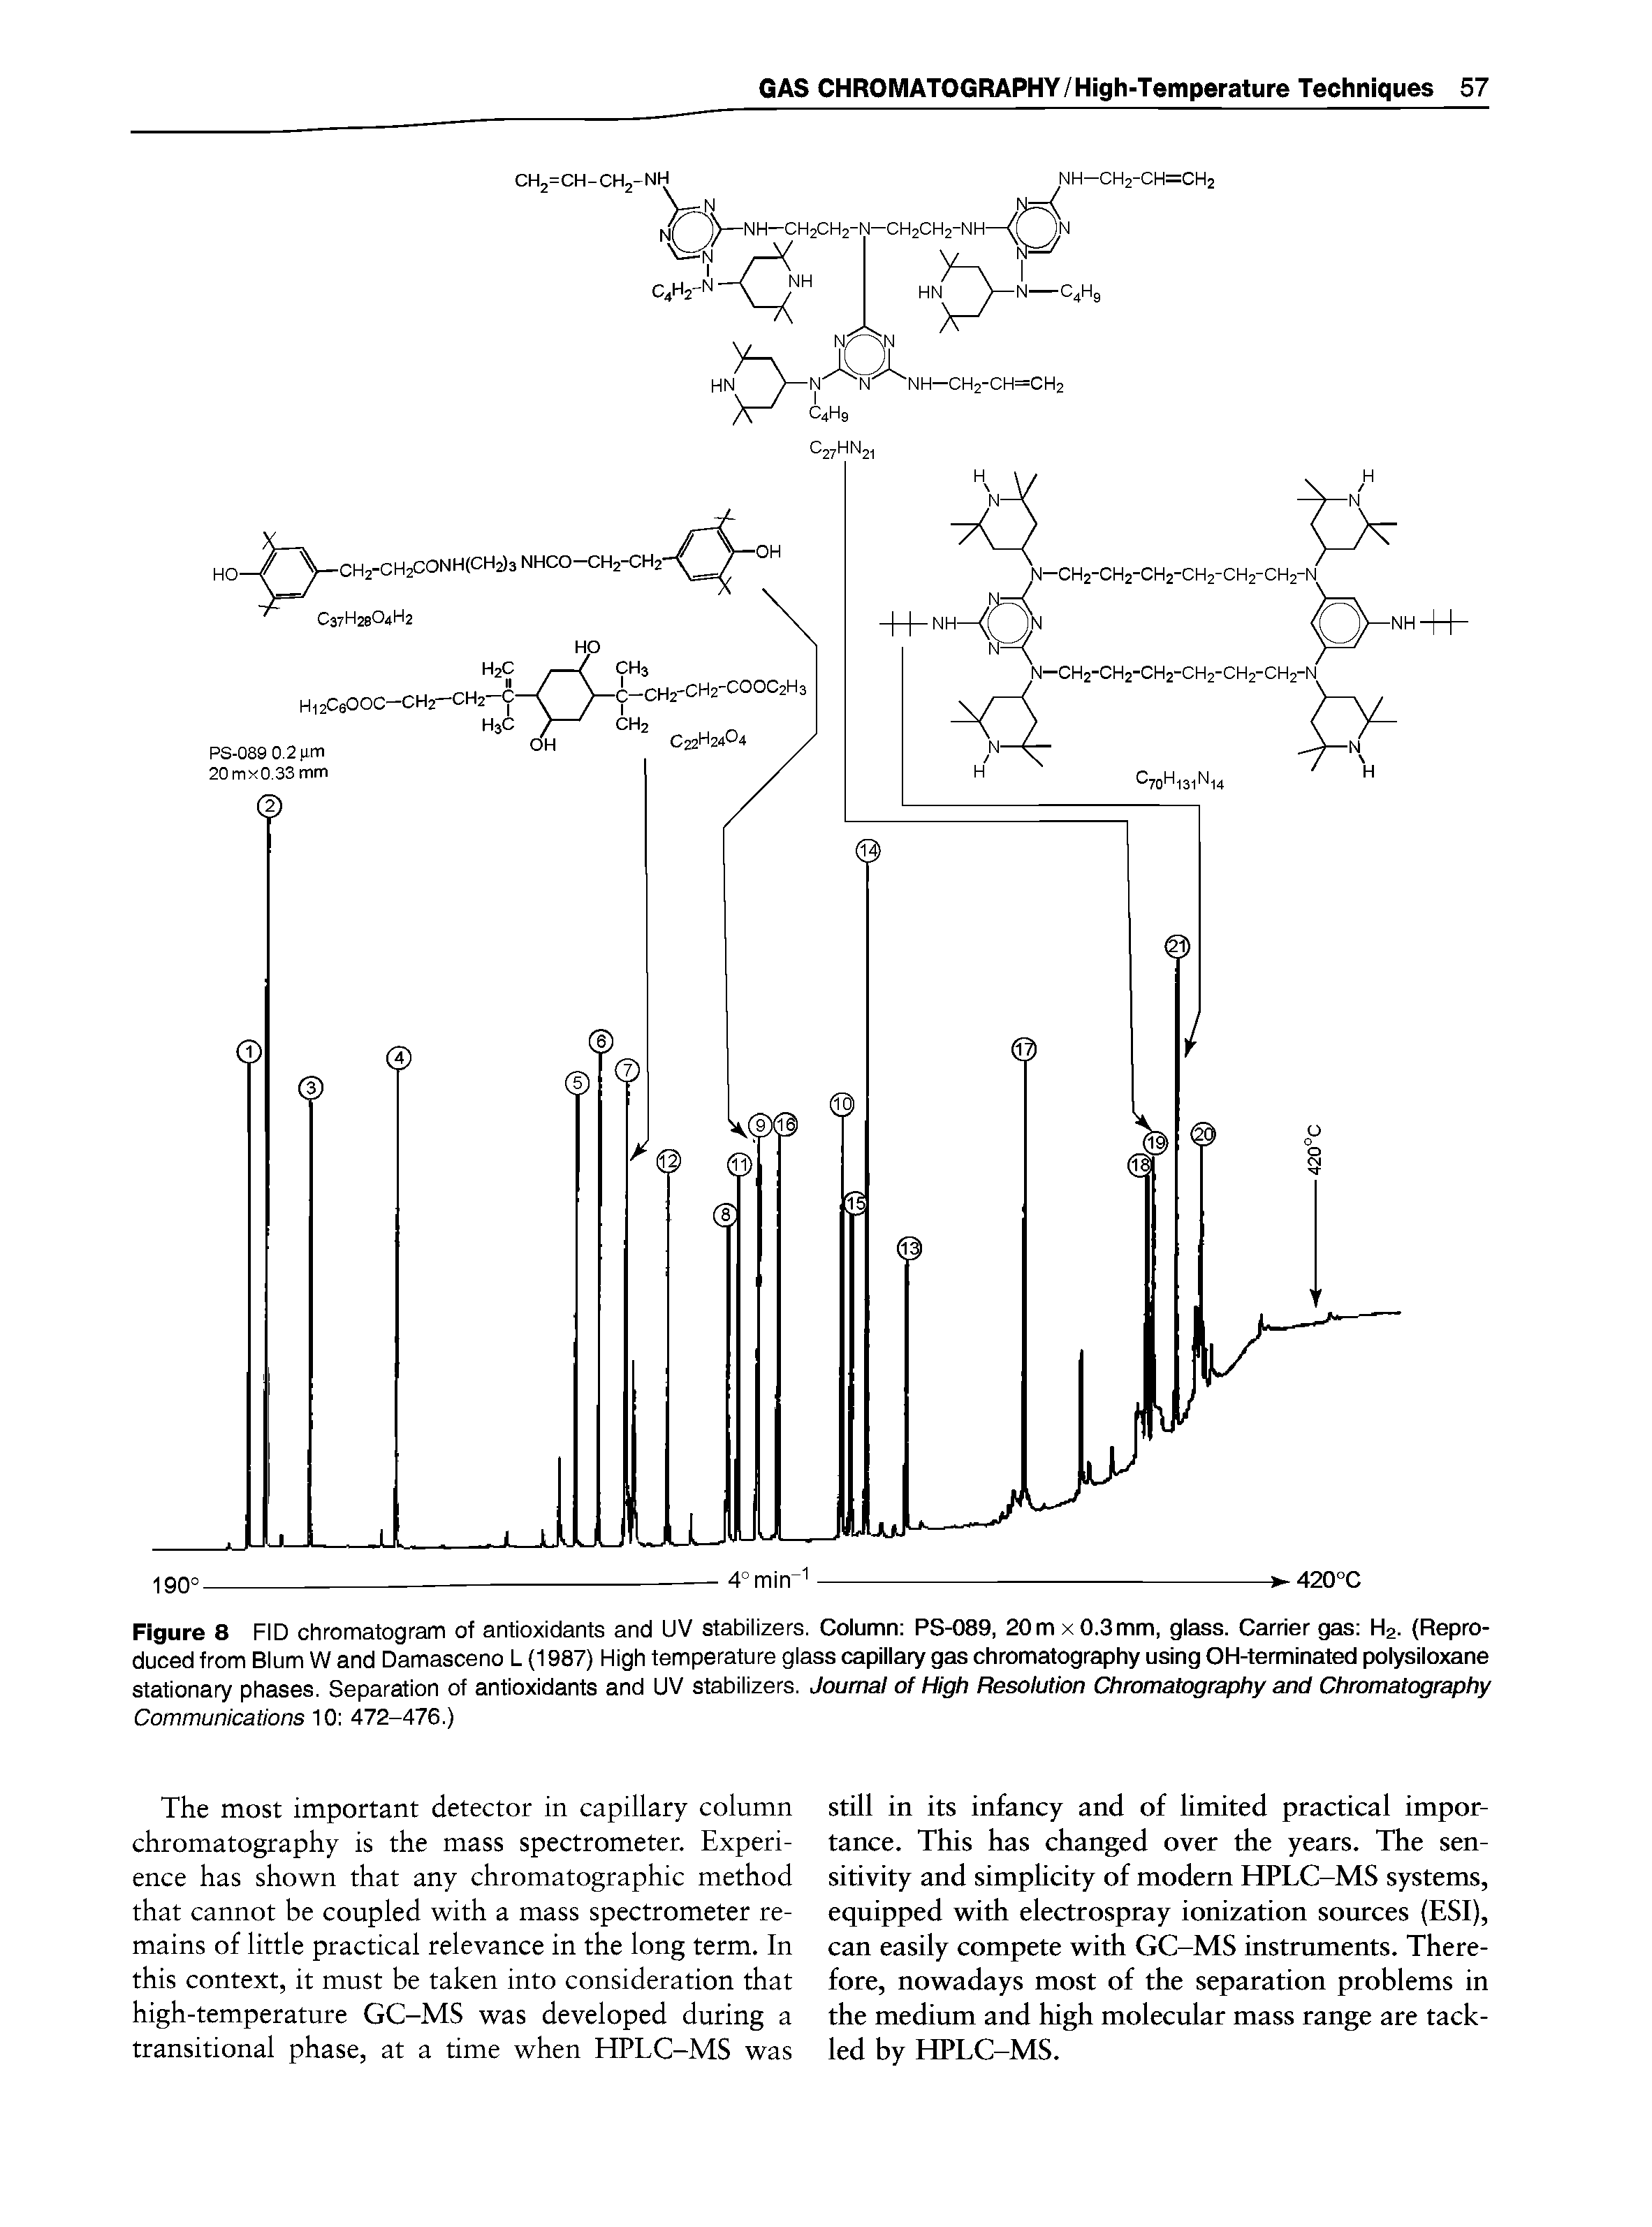 Figure 8 FID chromatogram of antioxidants and UV stabilizers. Column PS-089, 20m x 0.3mm, glass. Carrier gas H2. (Reproduced from Blum W and Damasceno L (1987) High temperature glass capillary gas chromatography using OH-terminated polysiloxane stationary phases. Separation of antioxidants and UV stabilizers. Journal of High Resolution Chromatography and Chromatography Communications 10 472-476.)...